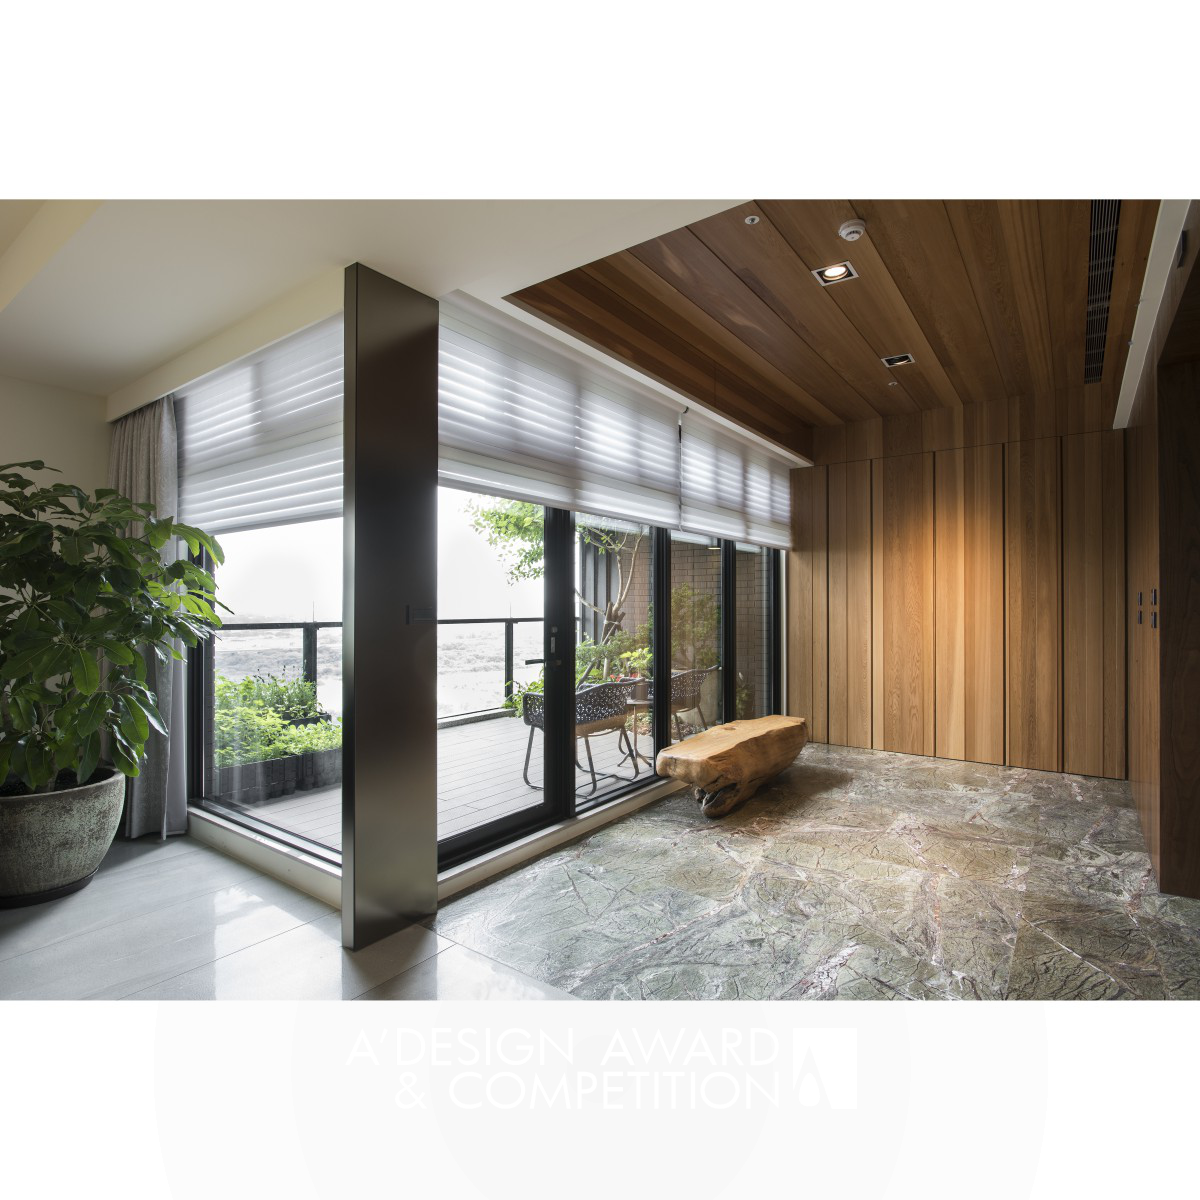 Showing fine elegance Residence by Wen-Ching Wu